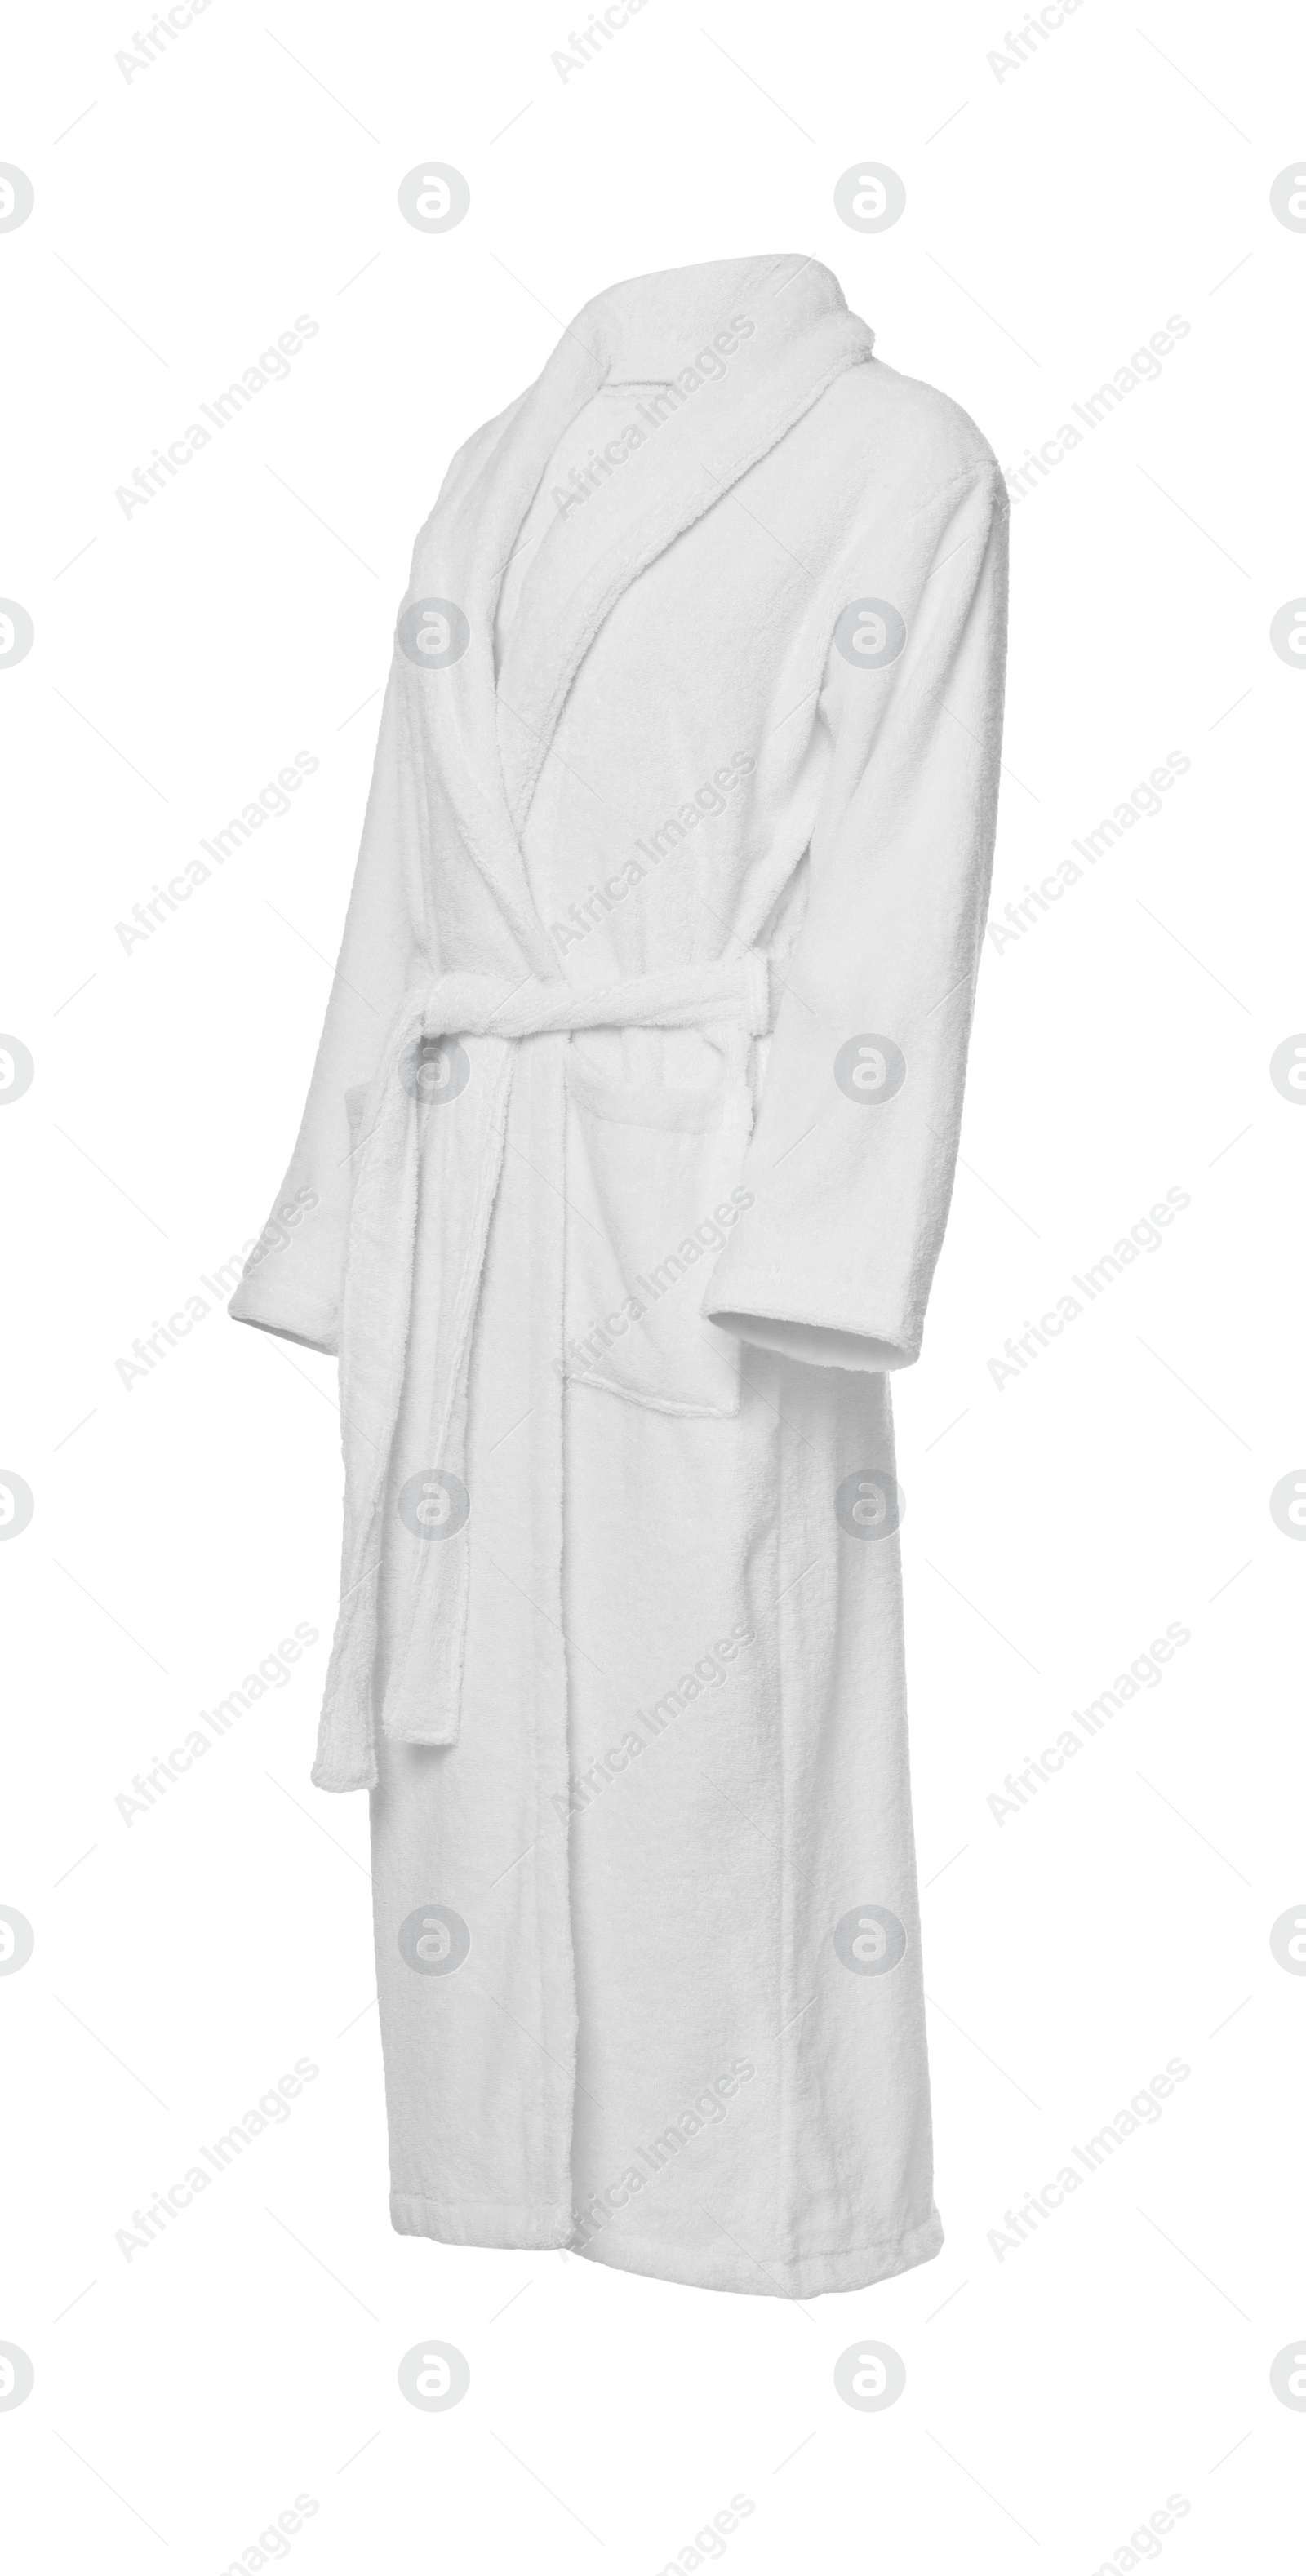 Image of Soft clean terry bathrobe isolated on white